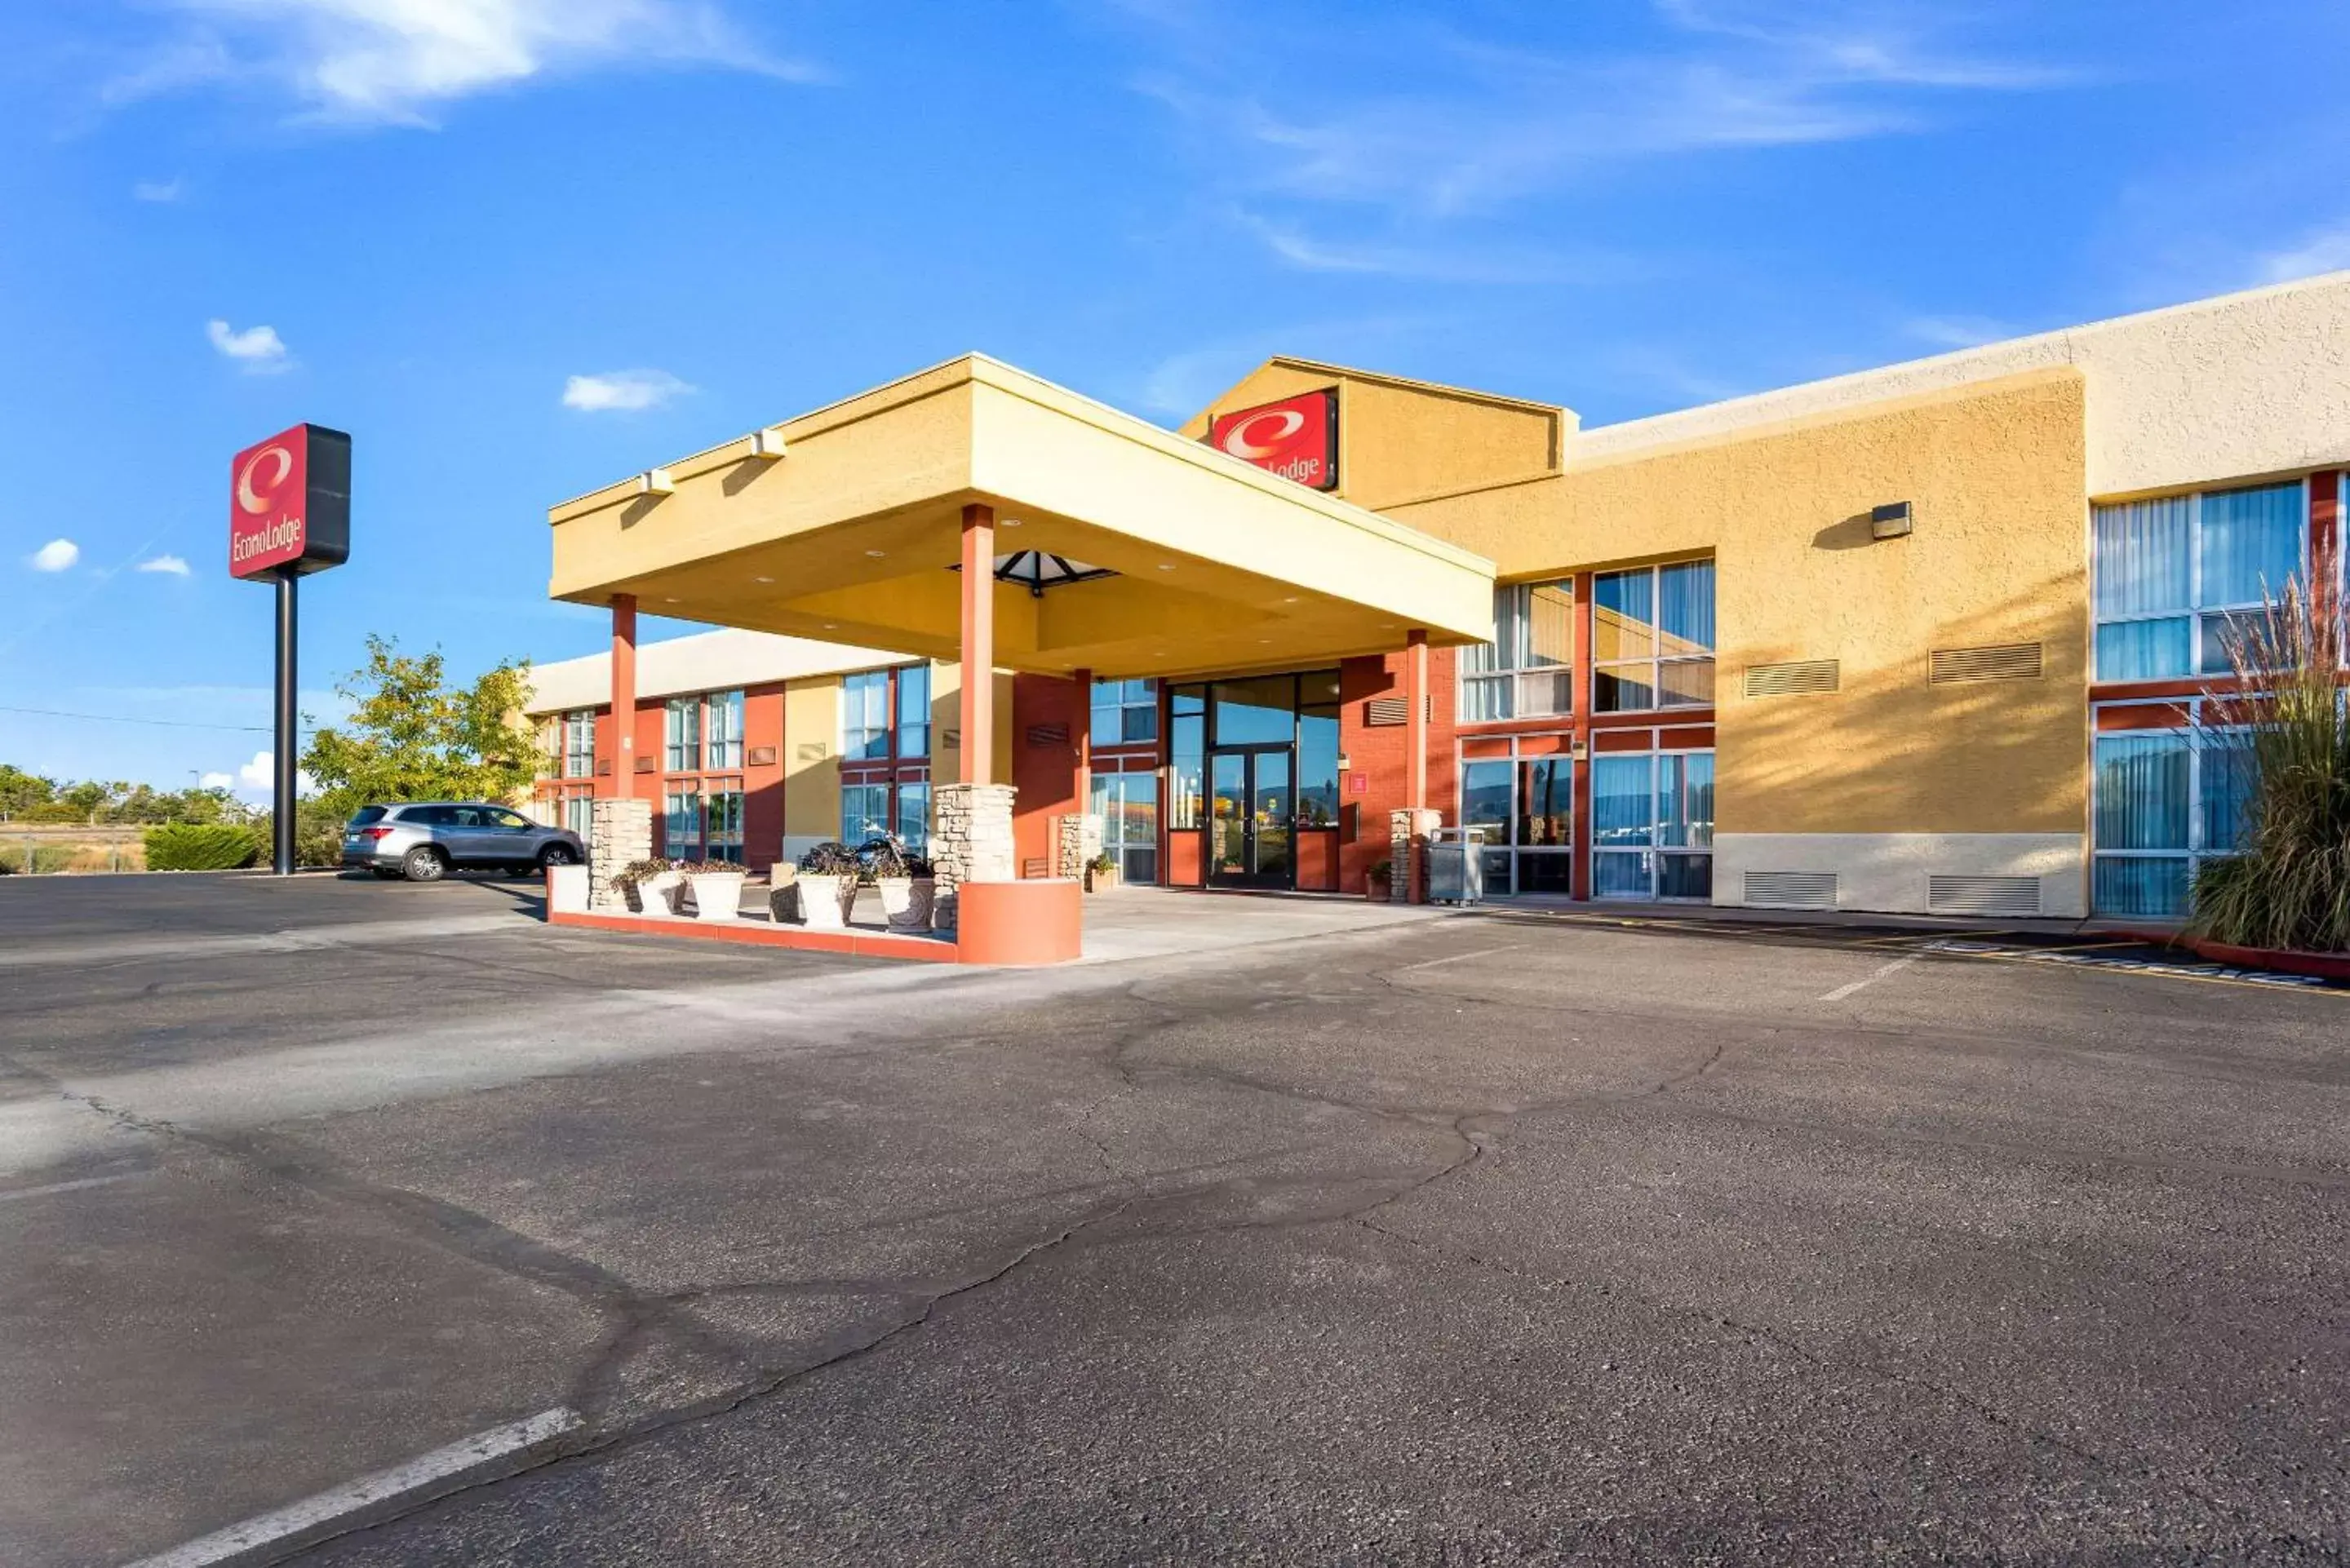 Property building in Econo Lodge Grand Junction